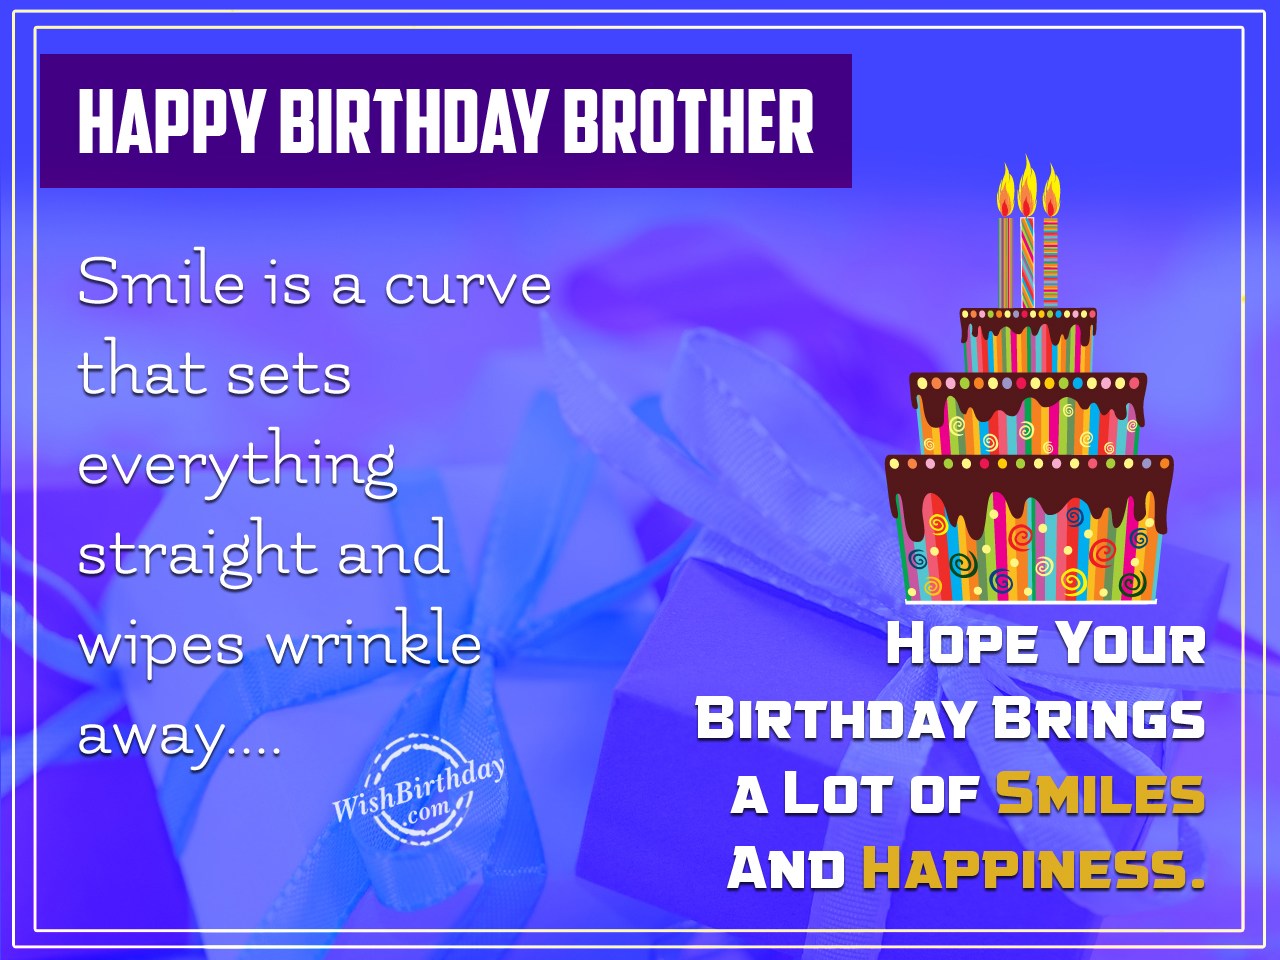 Birthday Wishes For Brother - Birthday Images, Pictures